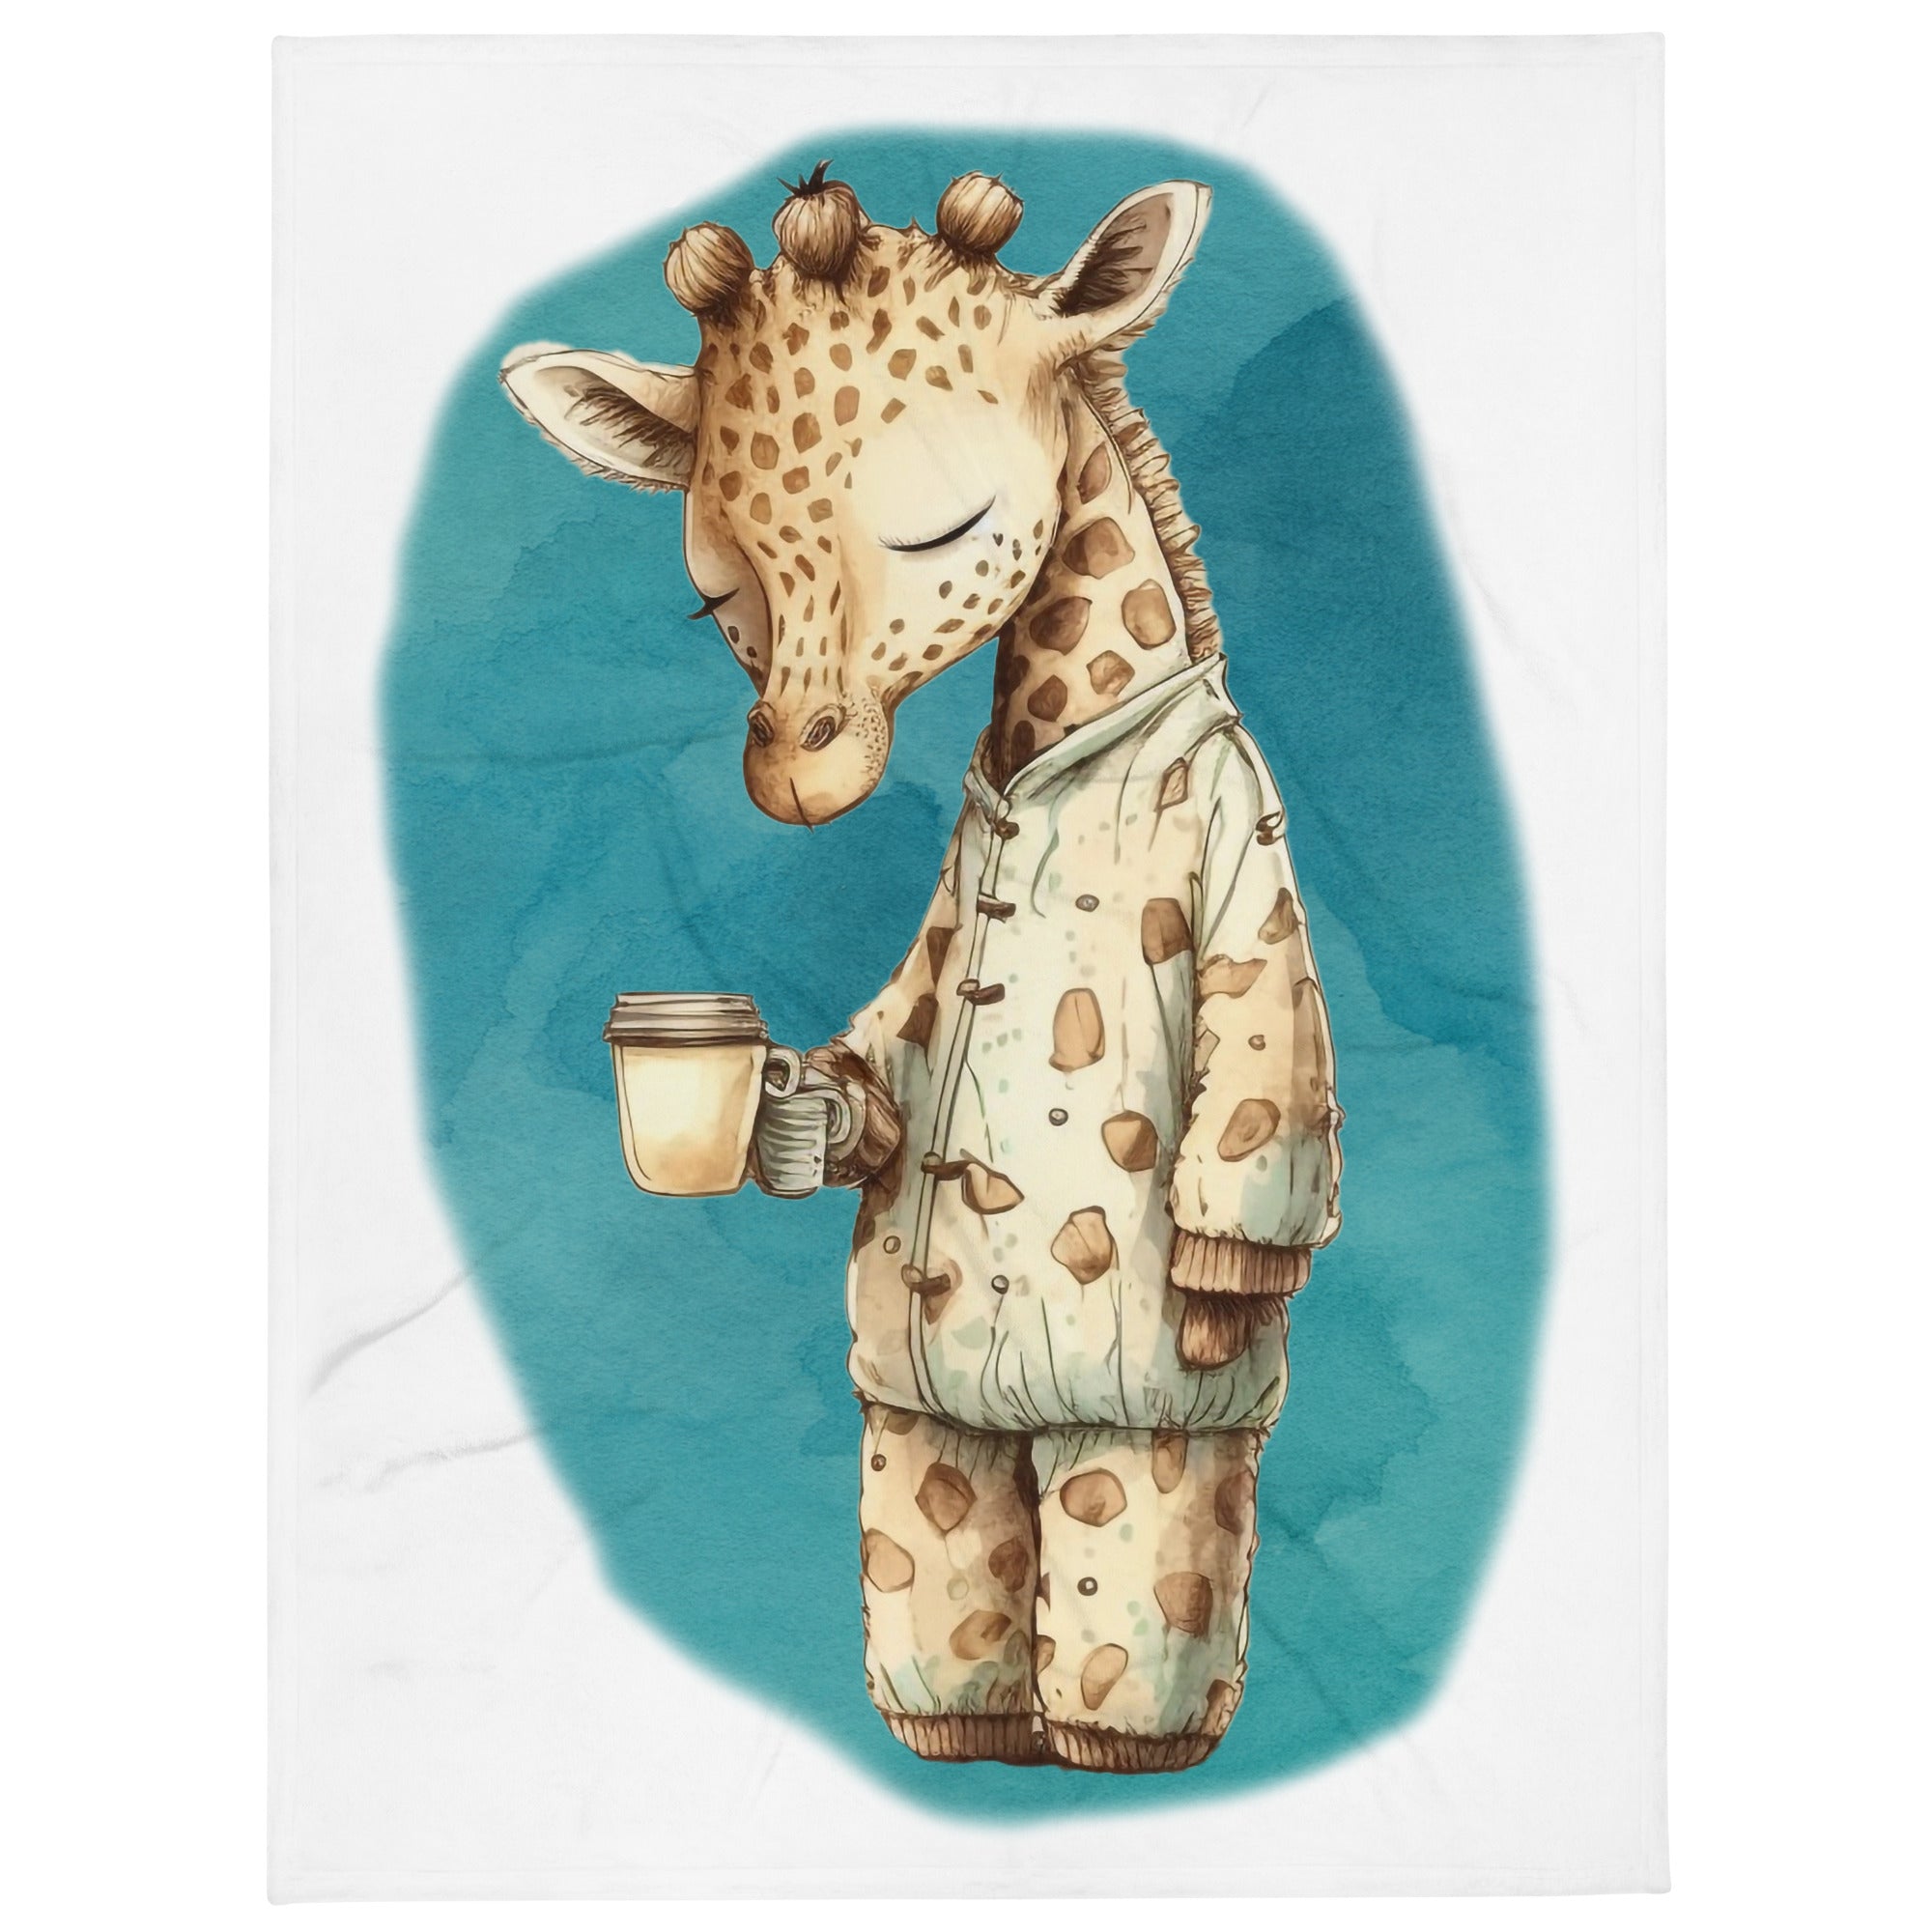 Sleepy Giraffe 100% Polyester Soft Silk Touch Fabric Throw Blanket - Cozy, Durable and Adorable